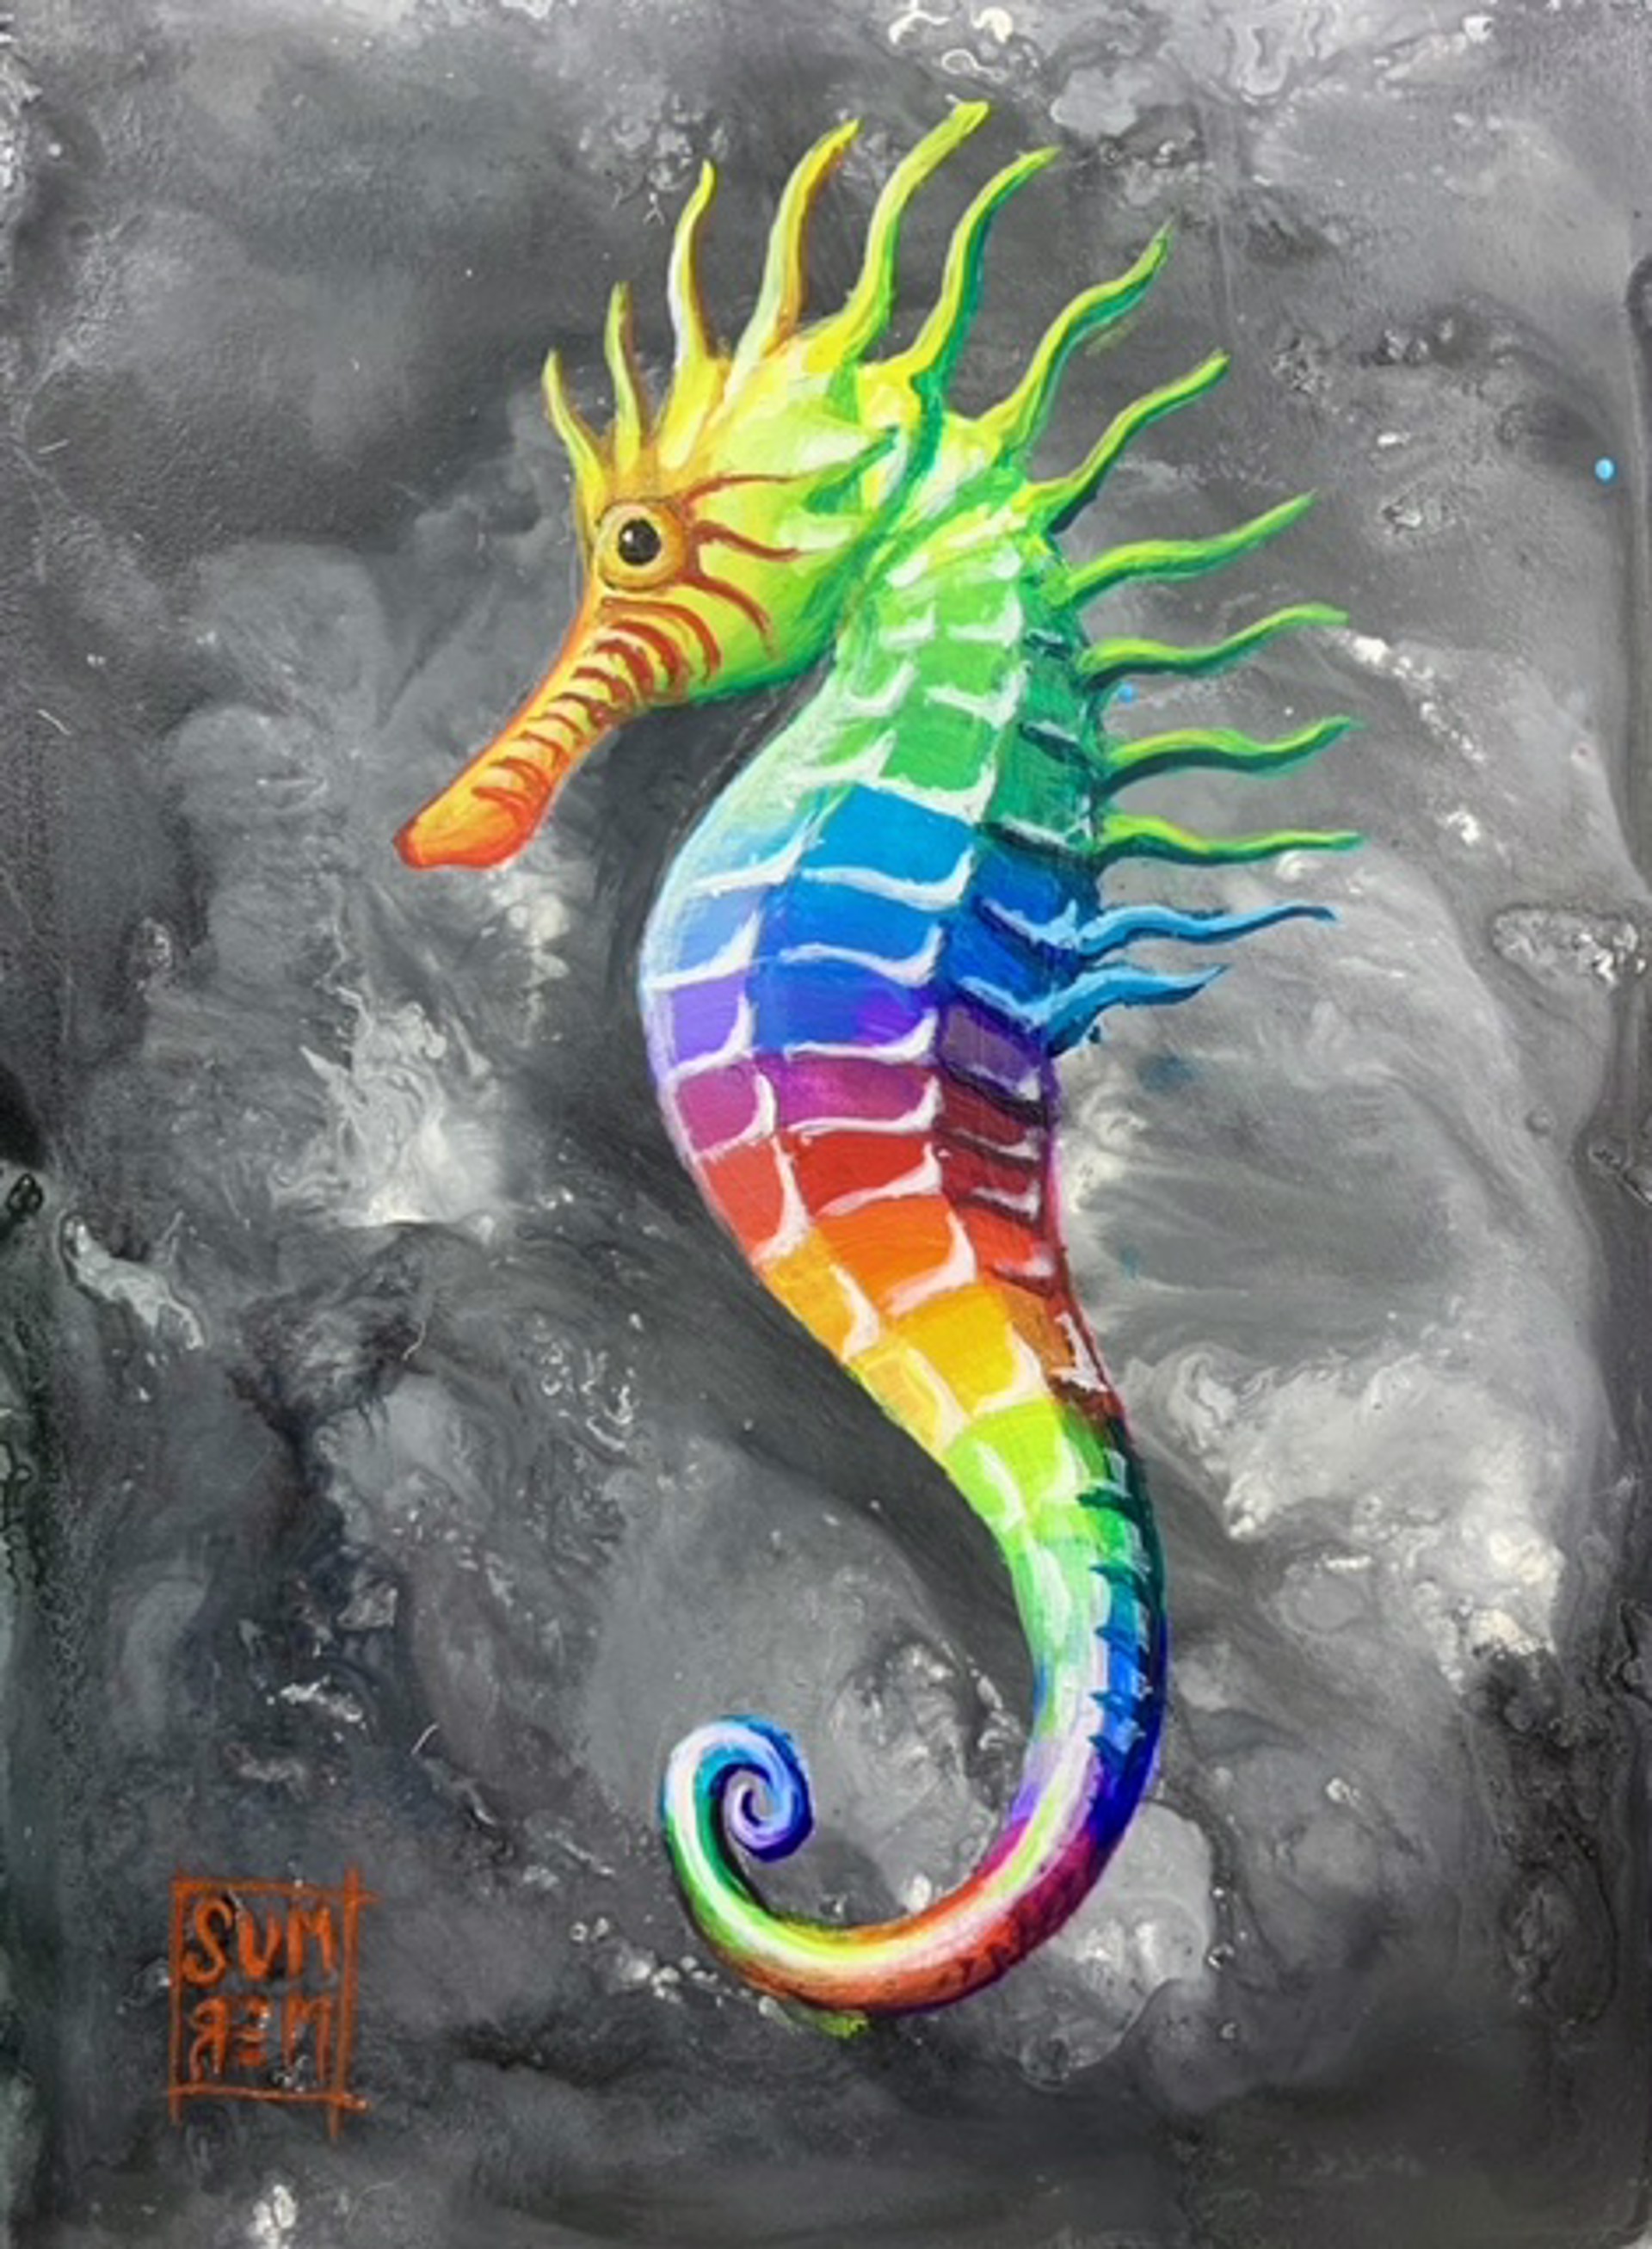 Seahorse II by Michael Summers